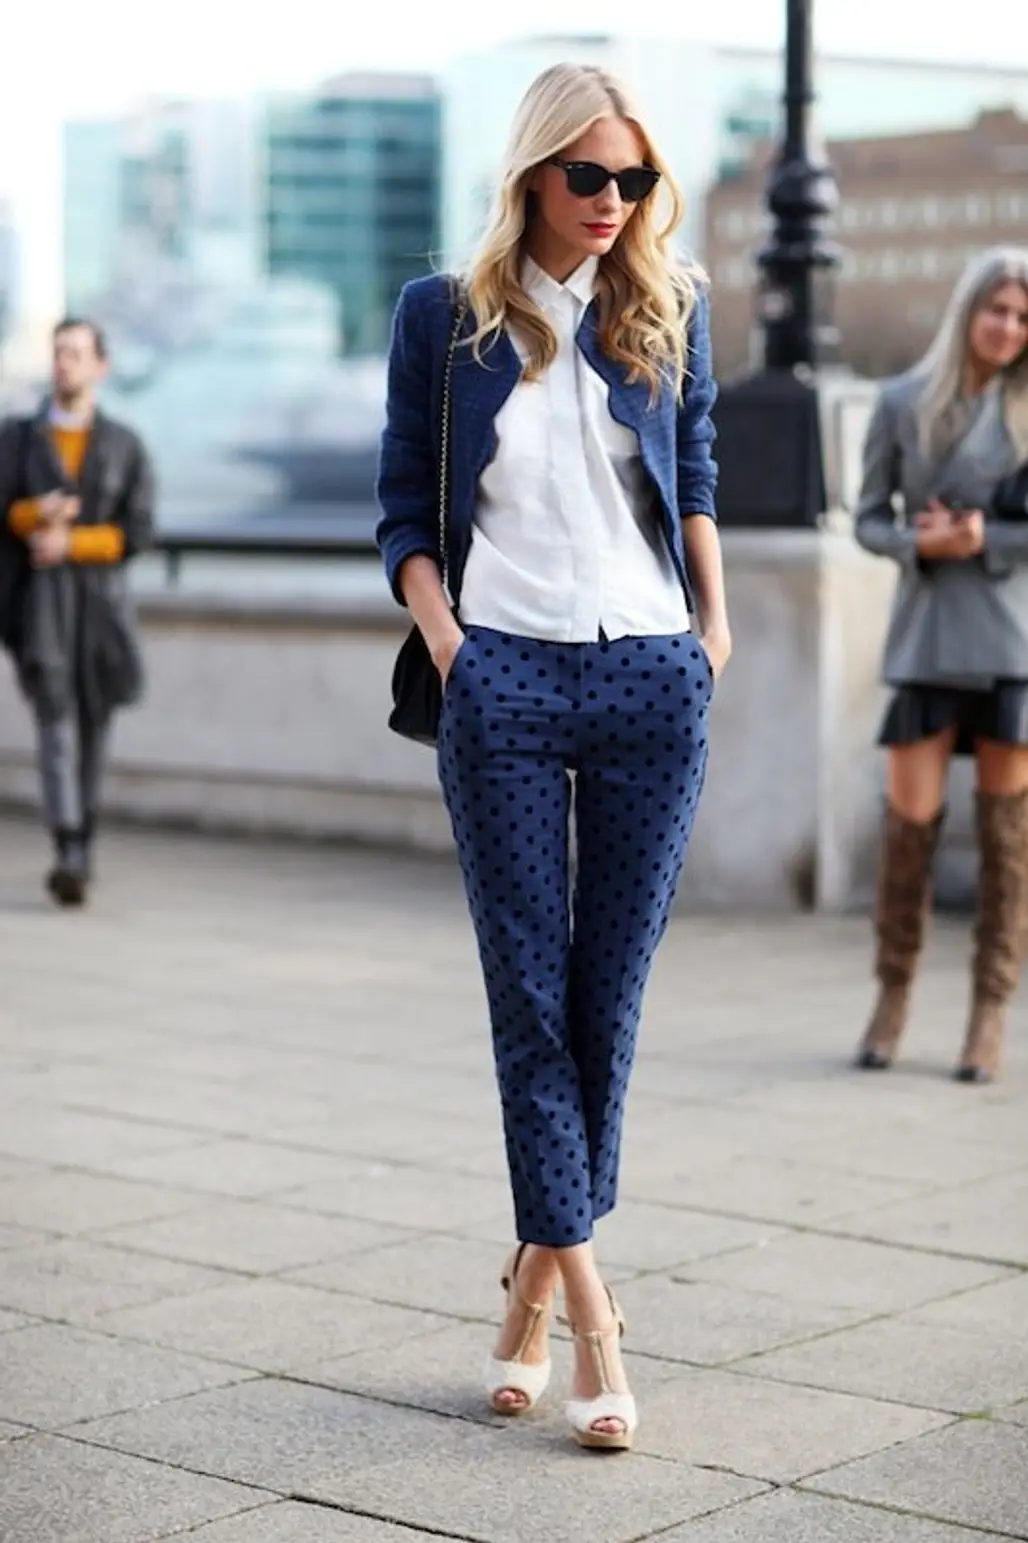 With Polka Dotted Pants and a Crop Jacket